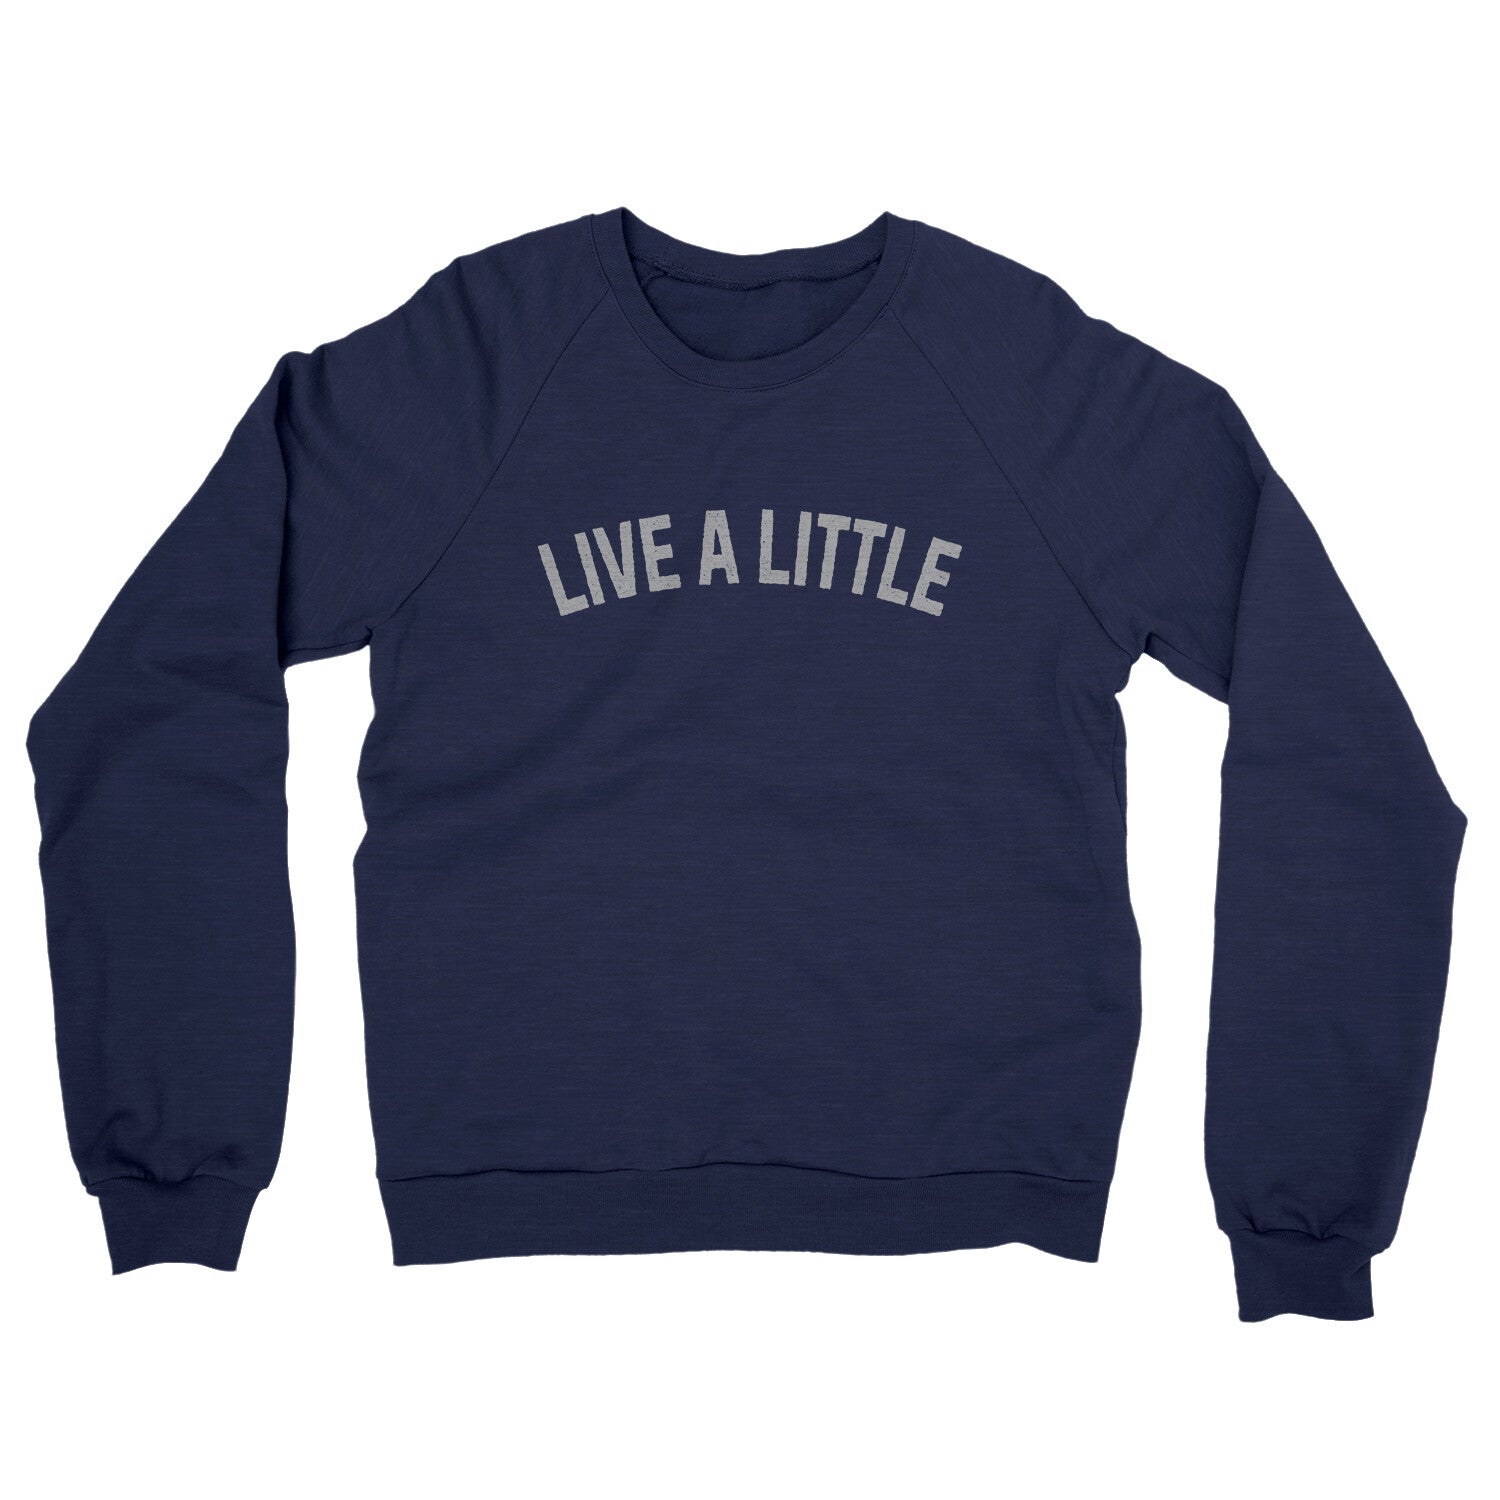 Live a Little in Navy Color